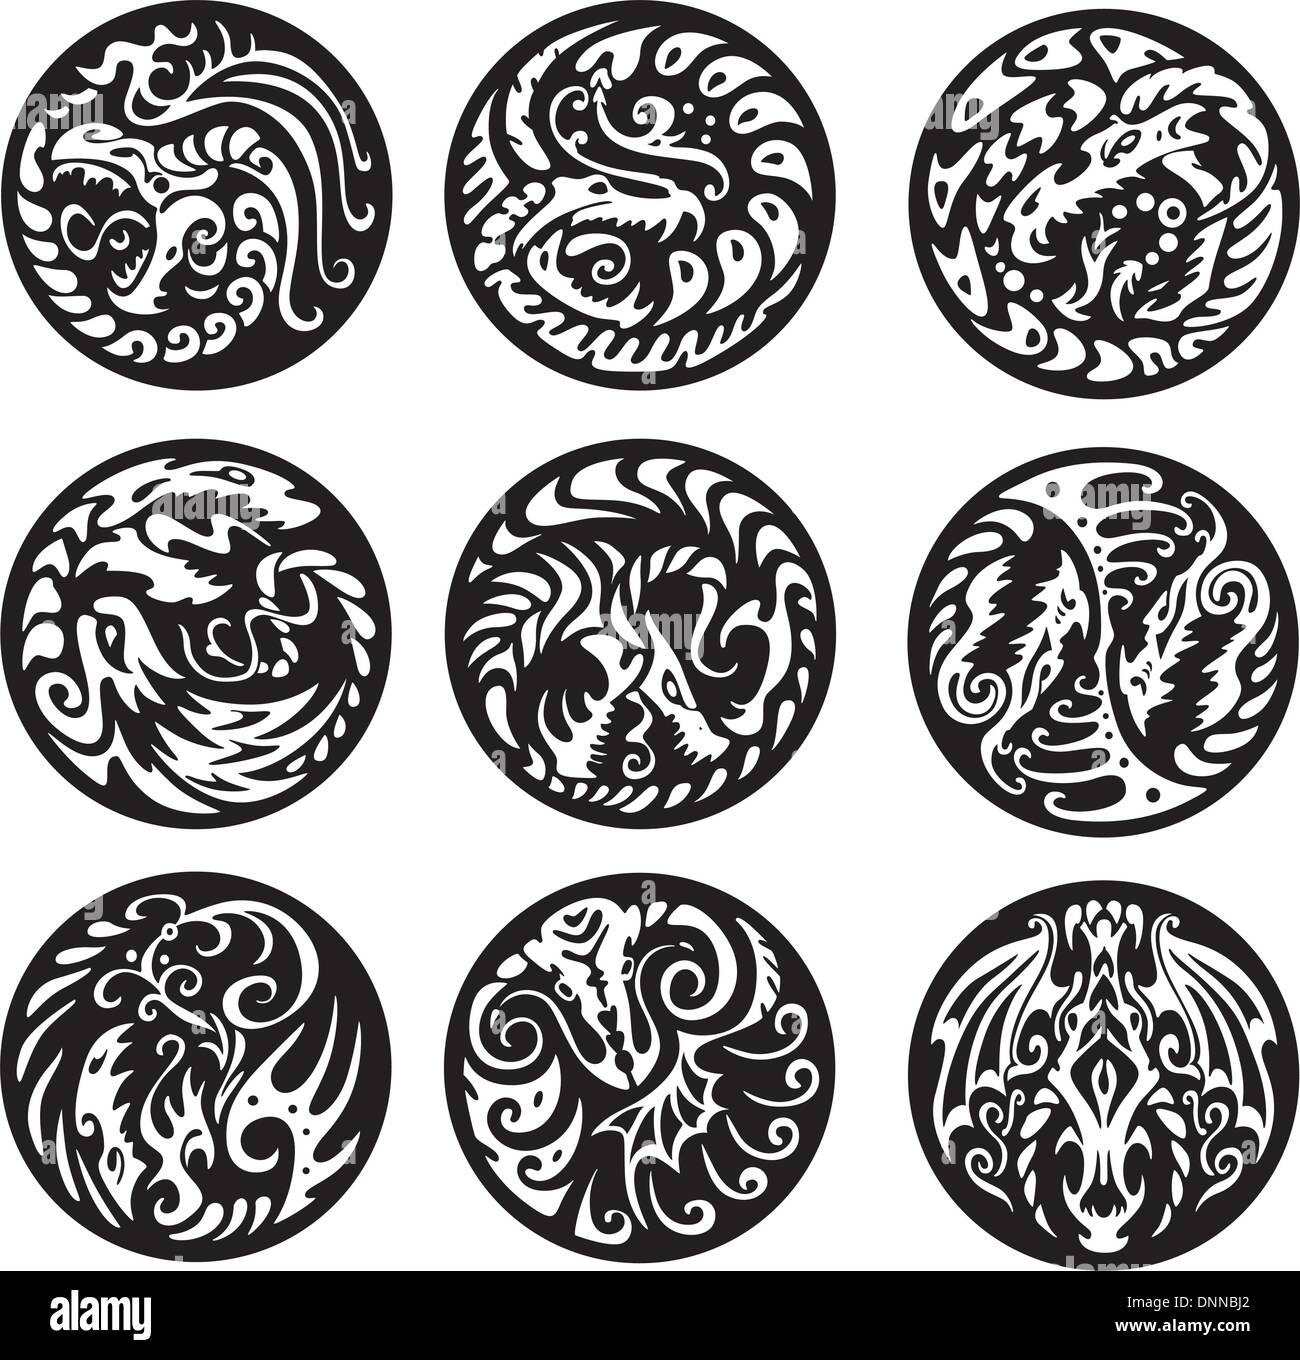 Round dragon designs. Set of black and white vector emblems. Stock Vector